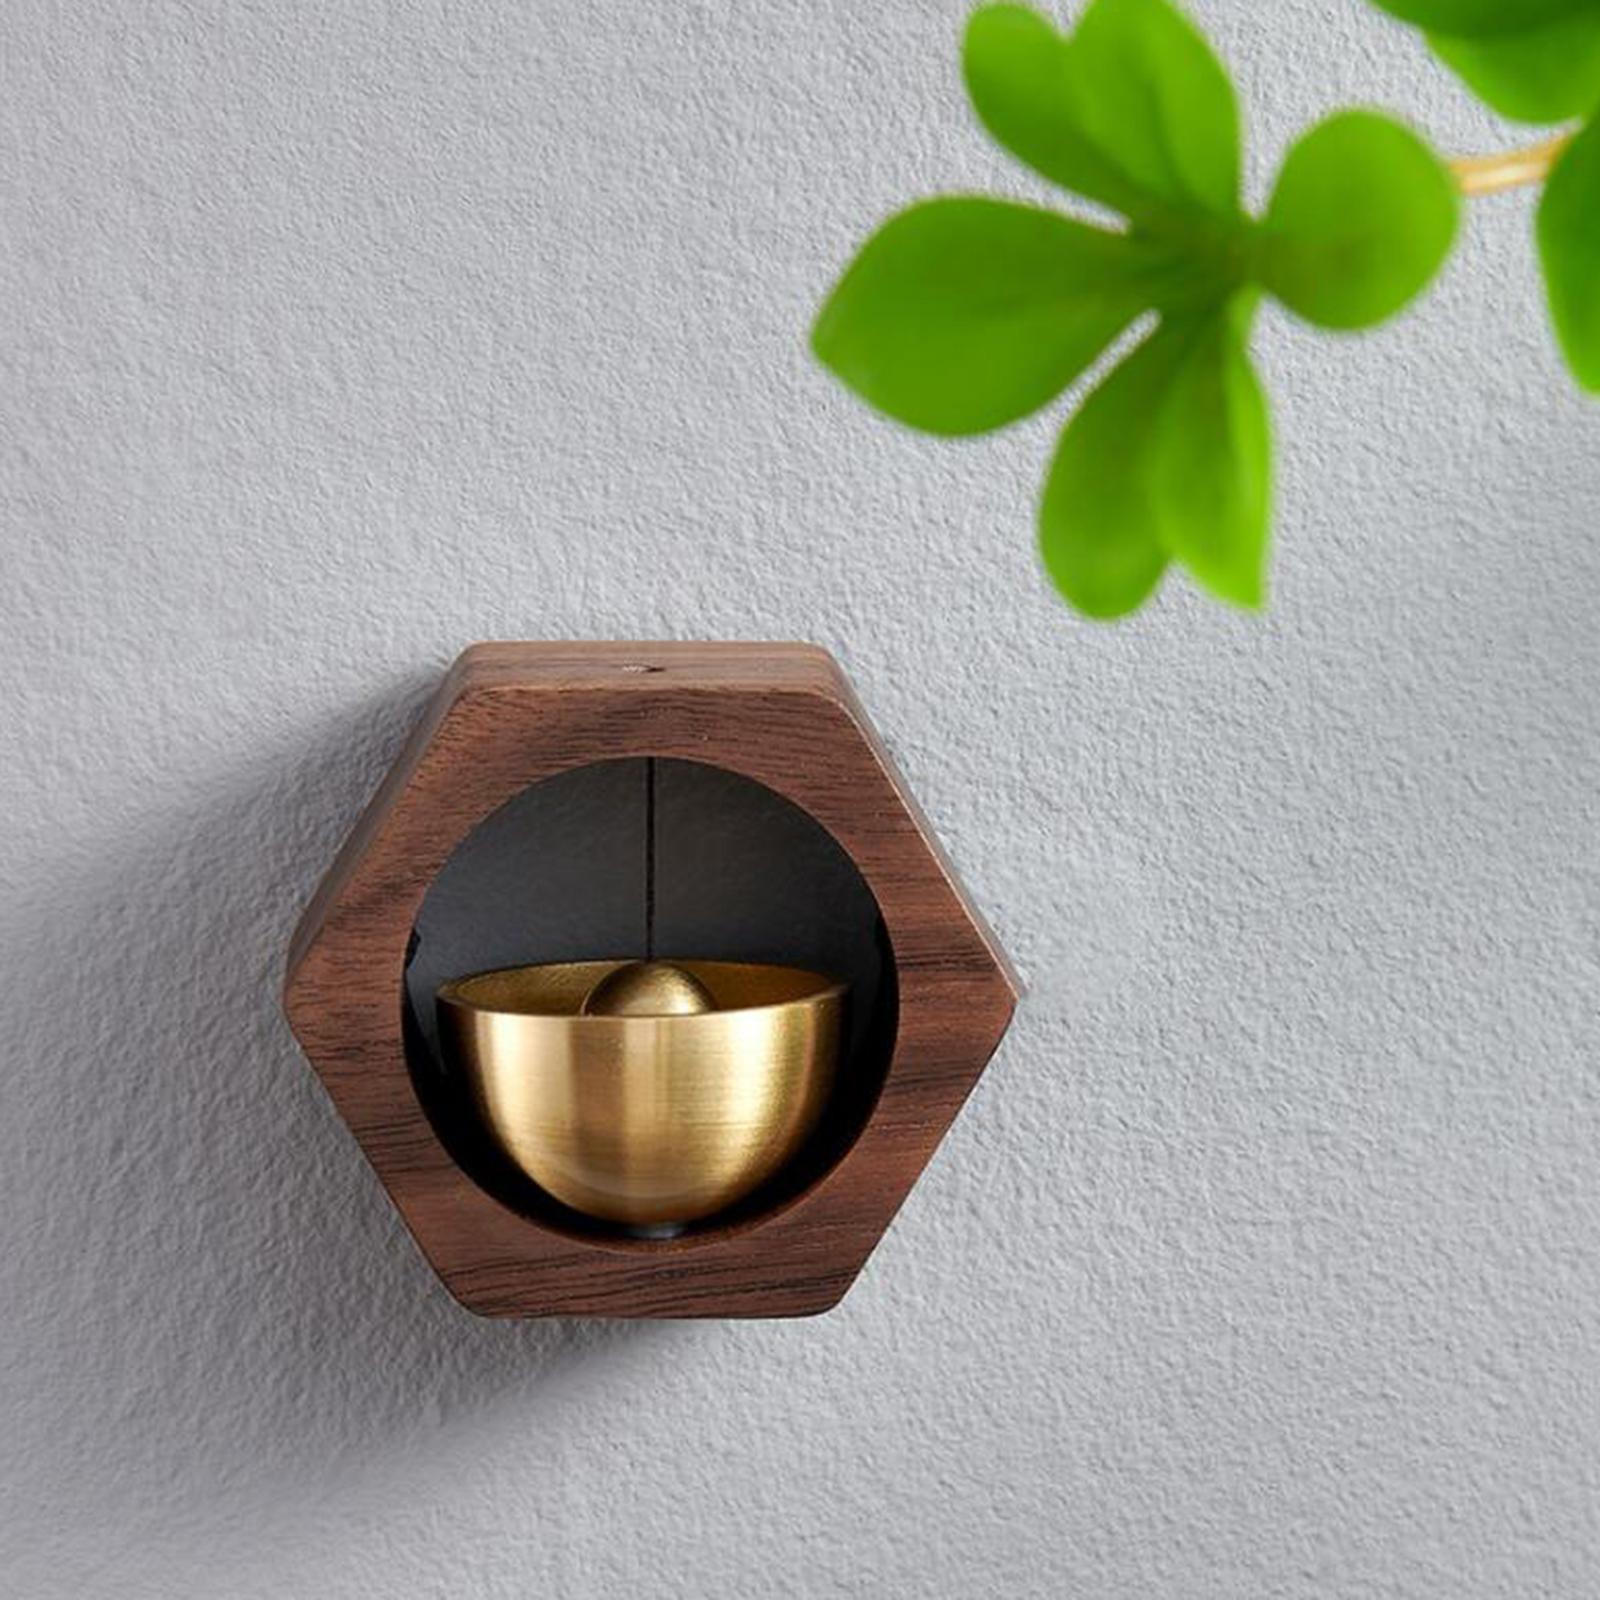 Doorbell Wind Chime Magnetic Shopkeepers Bell Home Decor Housewarming Gift Hexagon Walnut